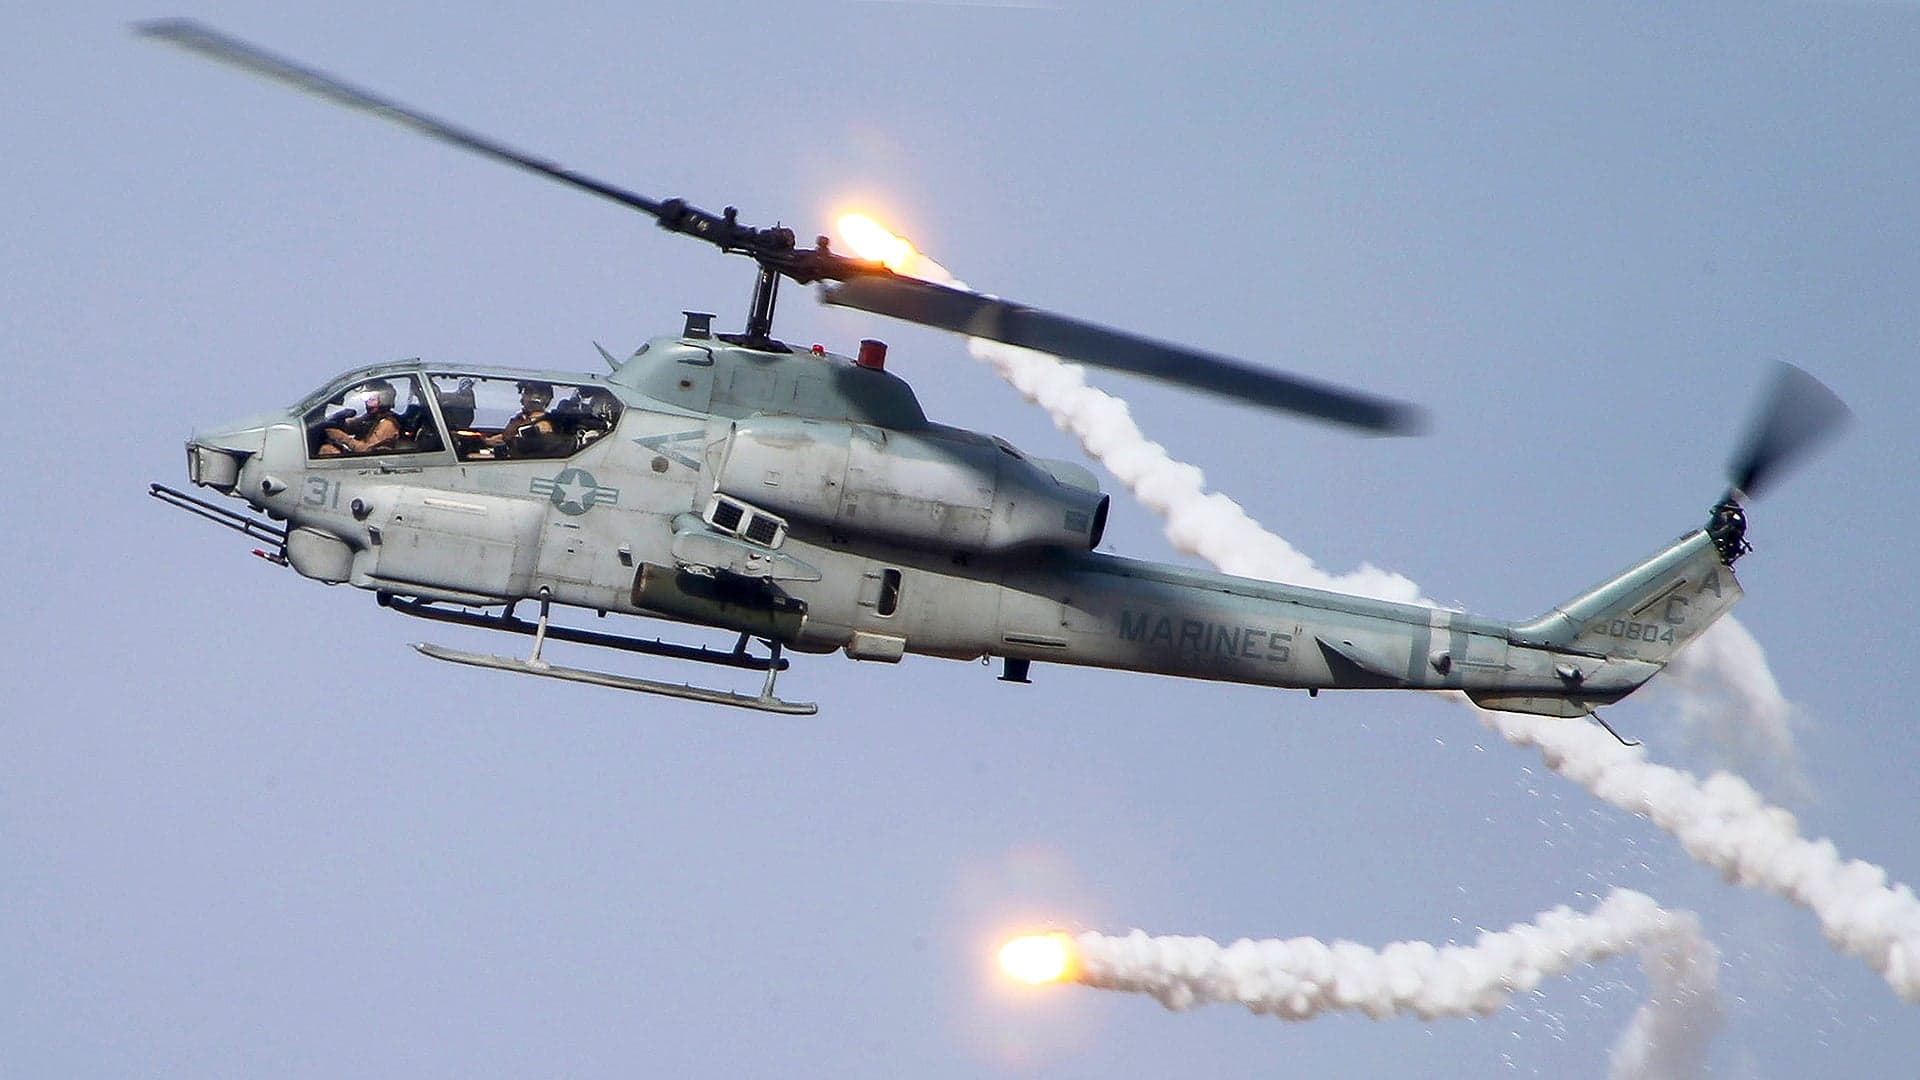 Pentagon To Sell-Off Its AH-1W Super Cobra Attack Helicopter Fleet